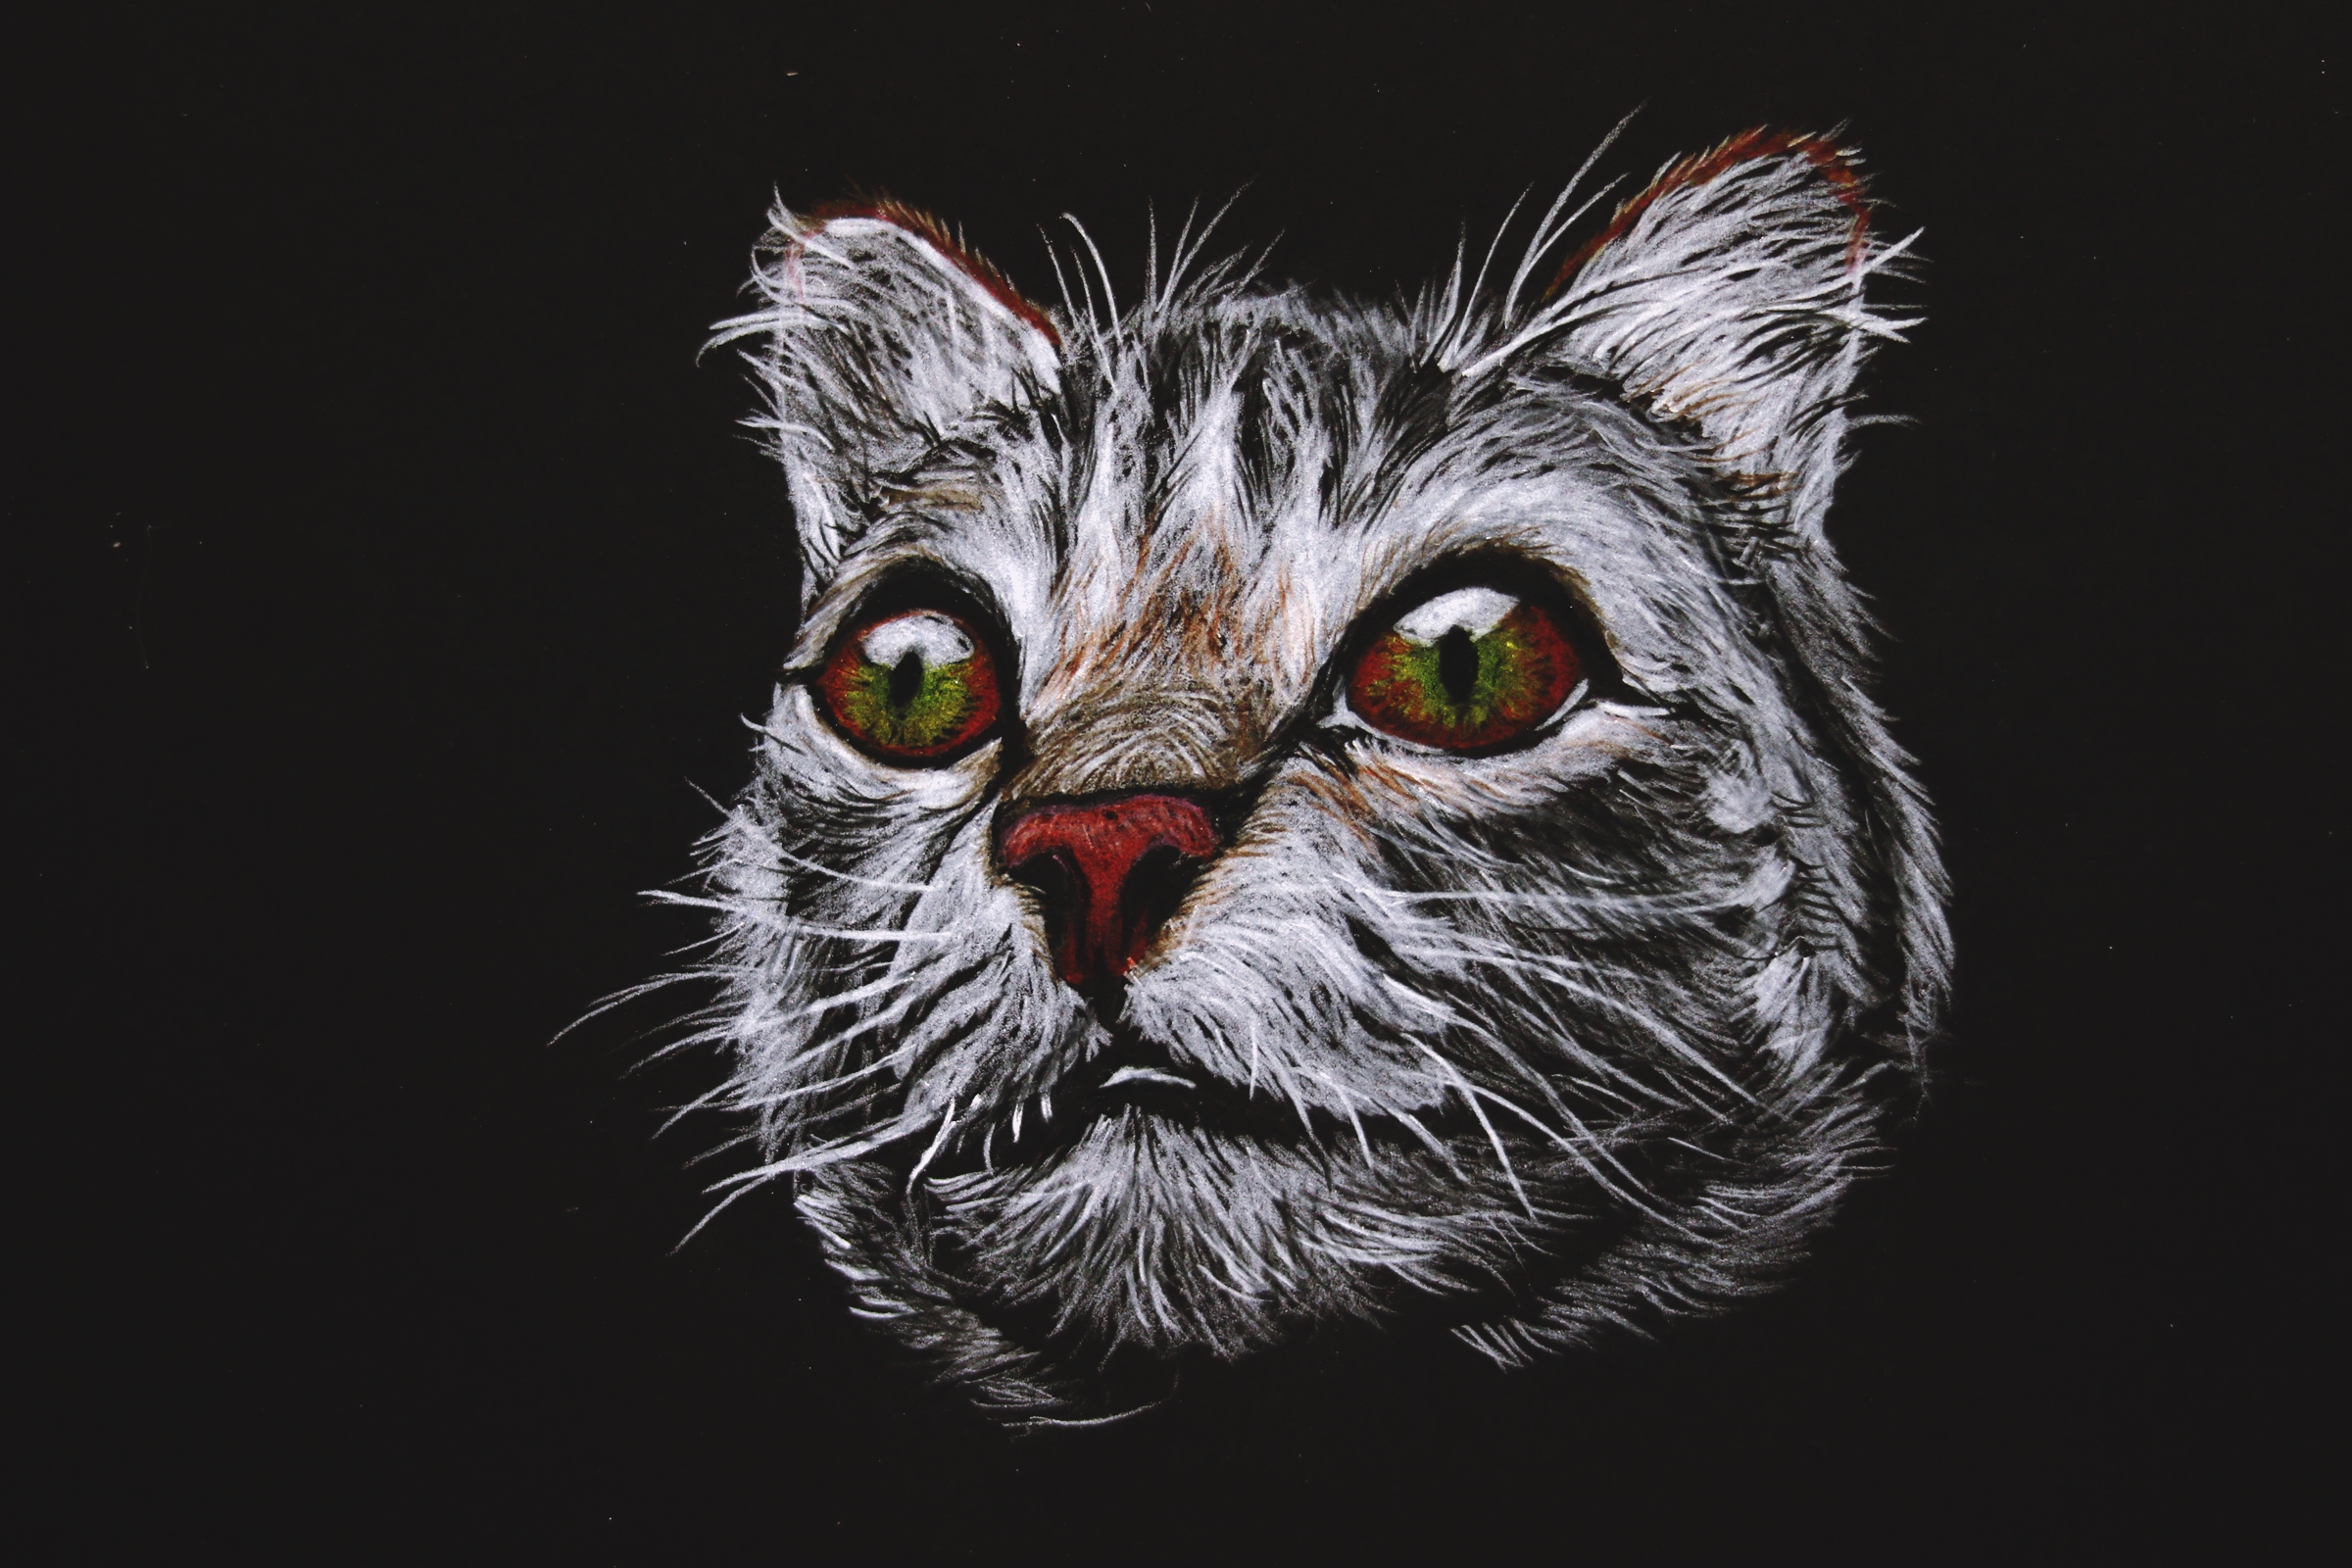 Colored Pencil Drawing 20 : The Cat by CelineHot on DeviantArt